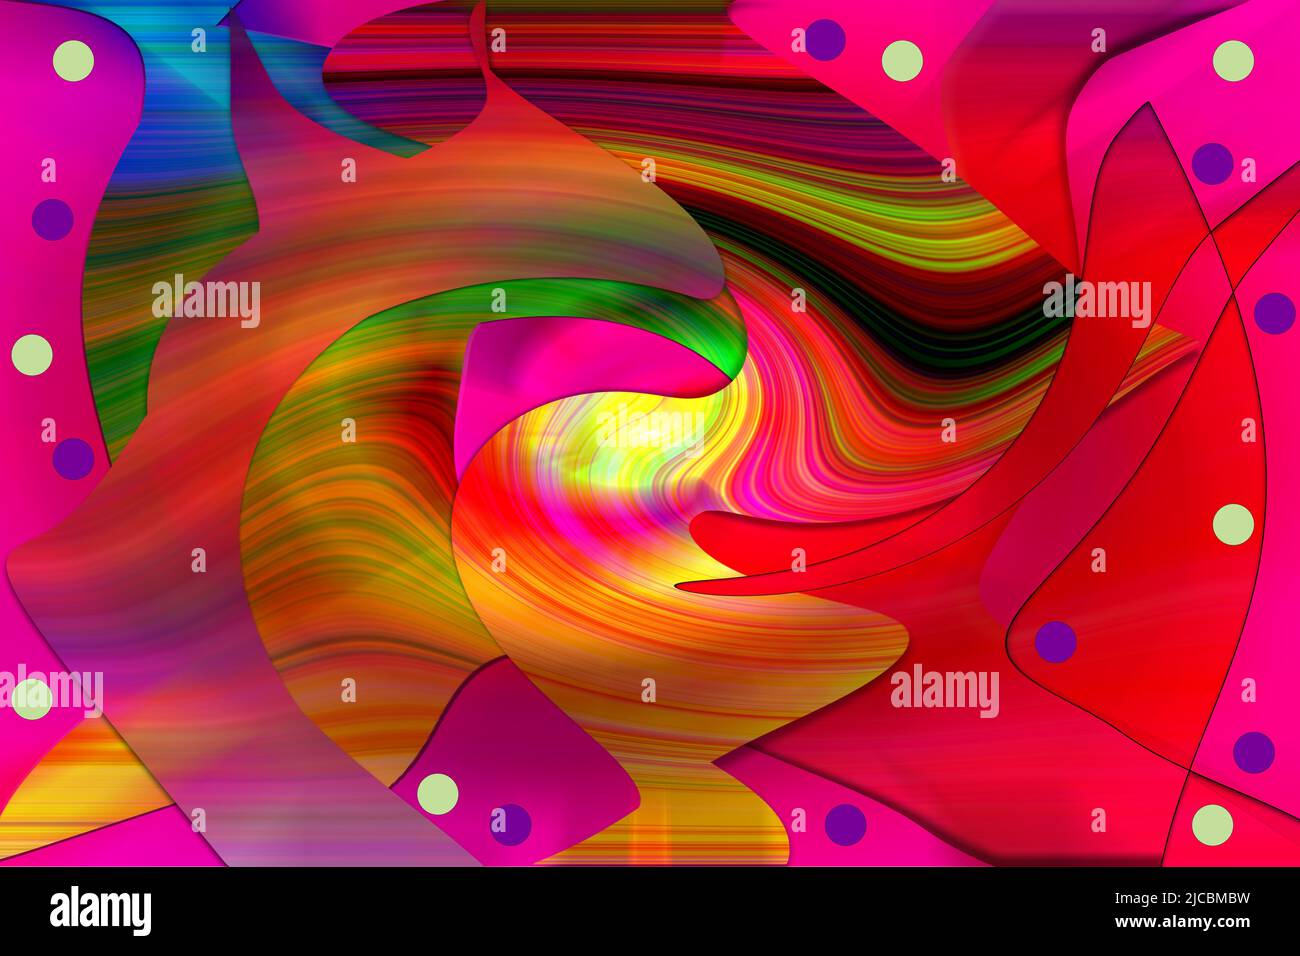 Digital art, 3D illustration, abstract symmetrical pattern in bright, vibrant colours Stock Photo